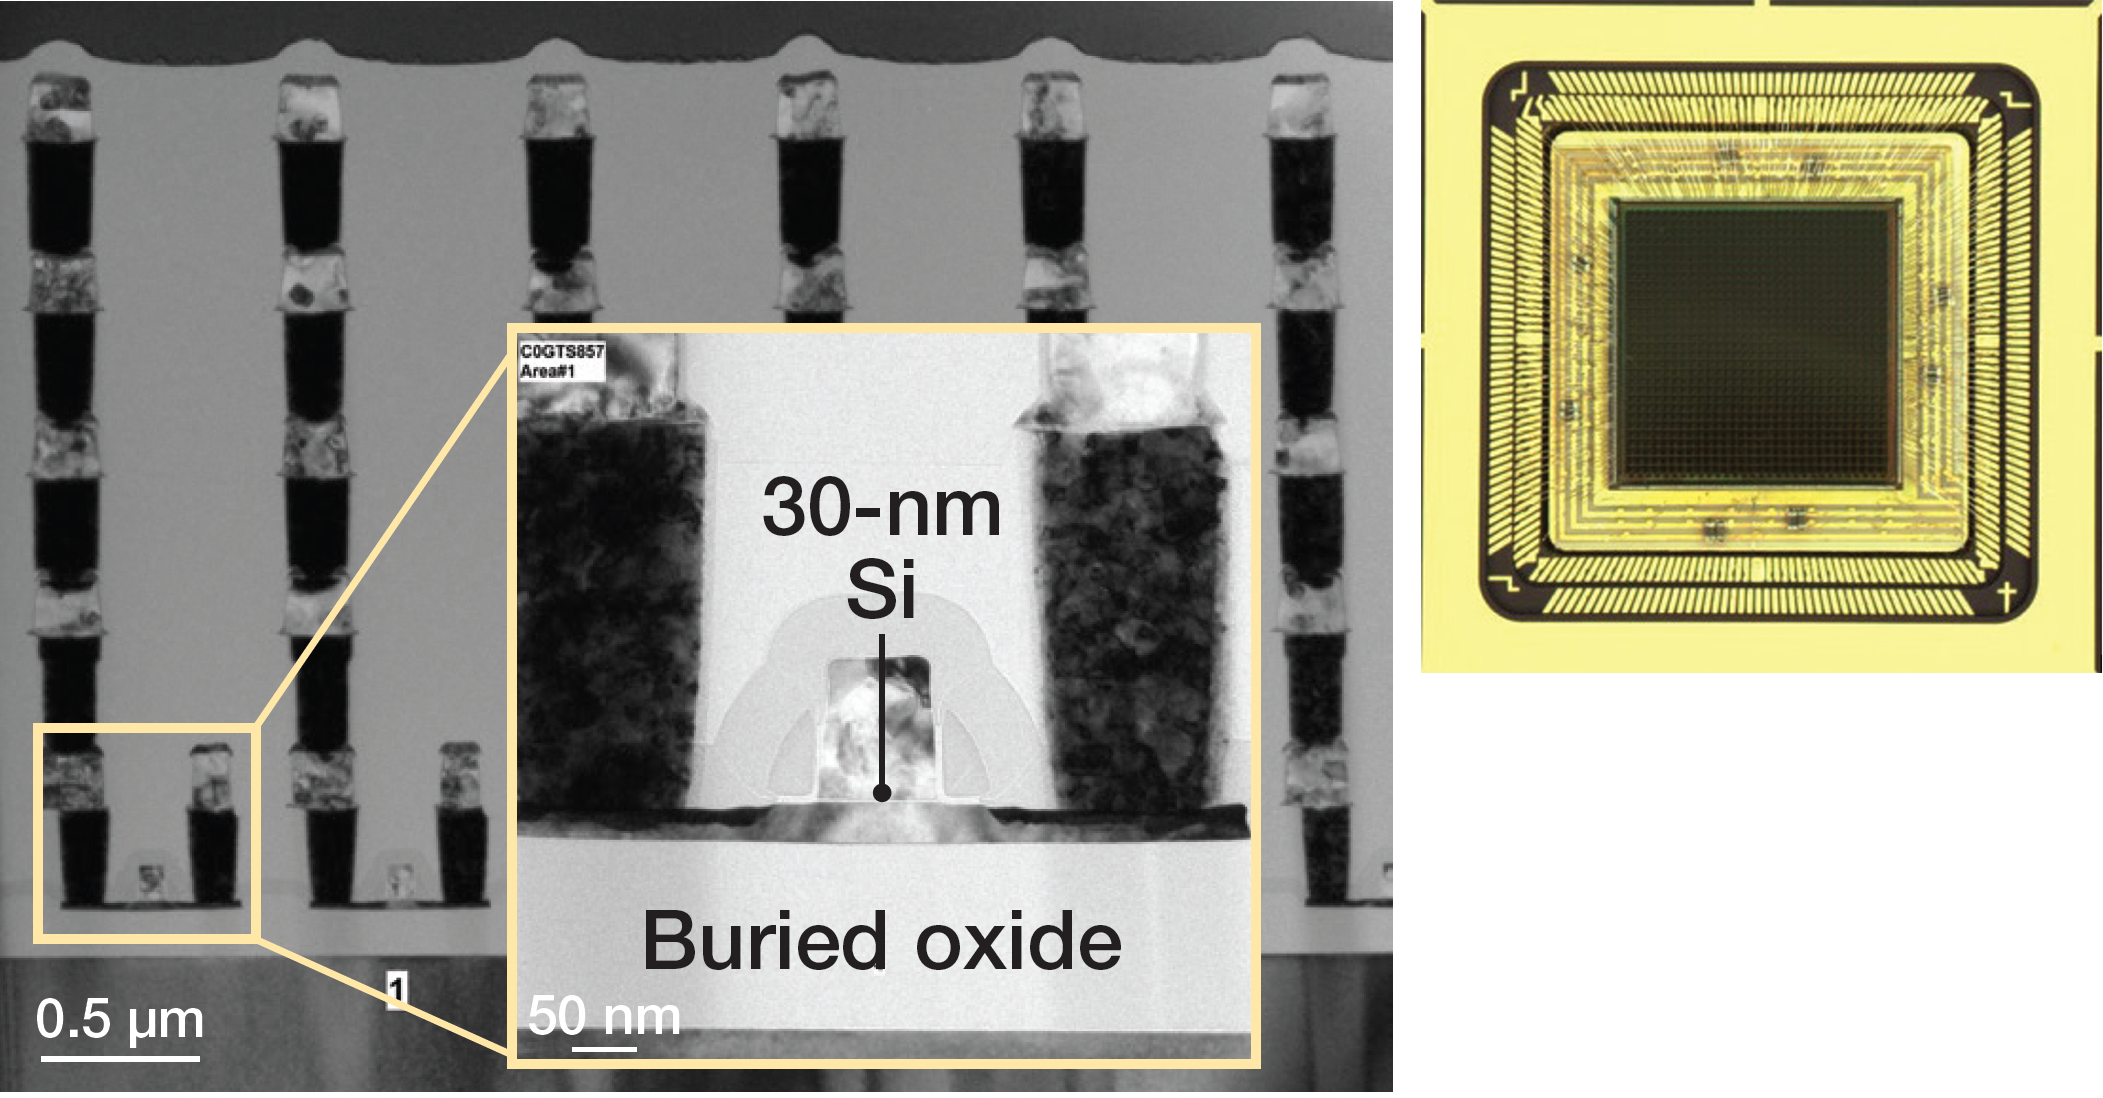 At left, TEM baseline FDSOI. At right, a double-row wirebonded circuit.